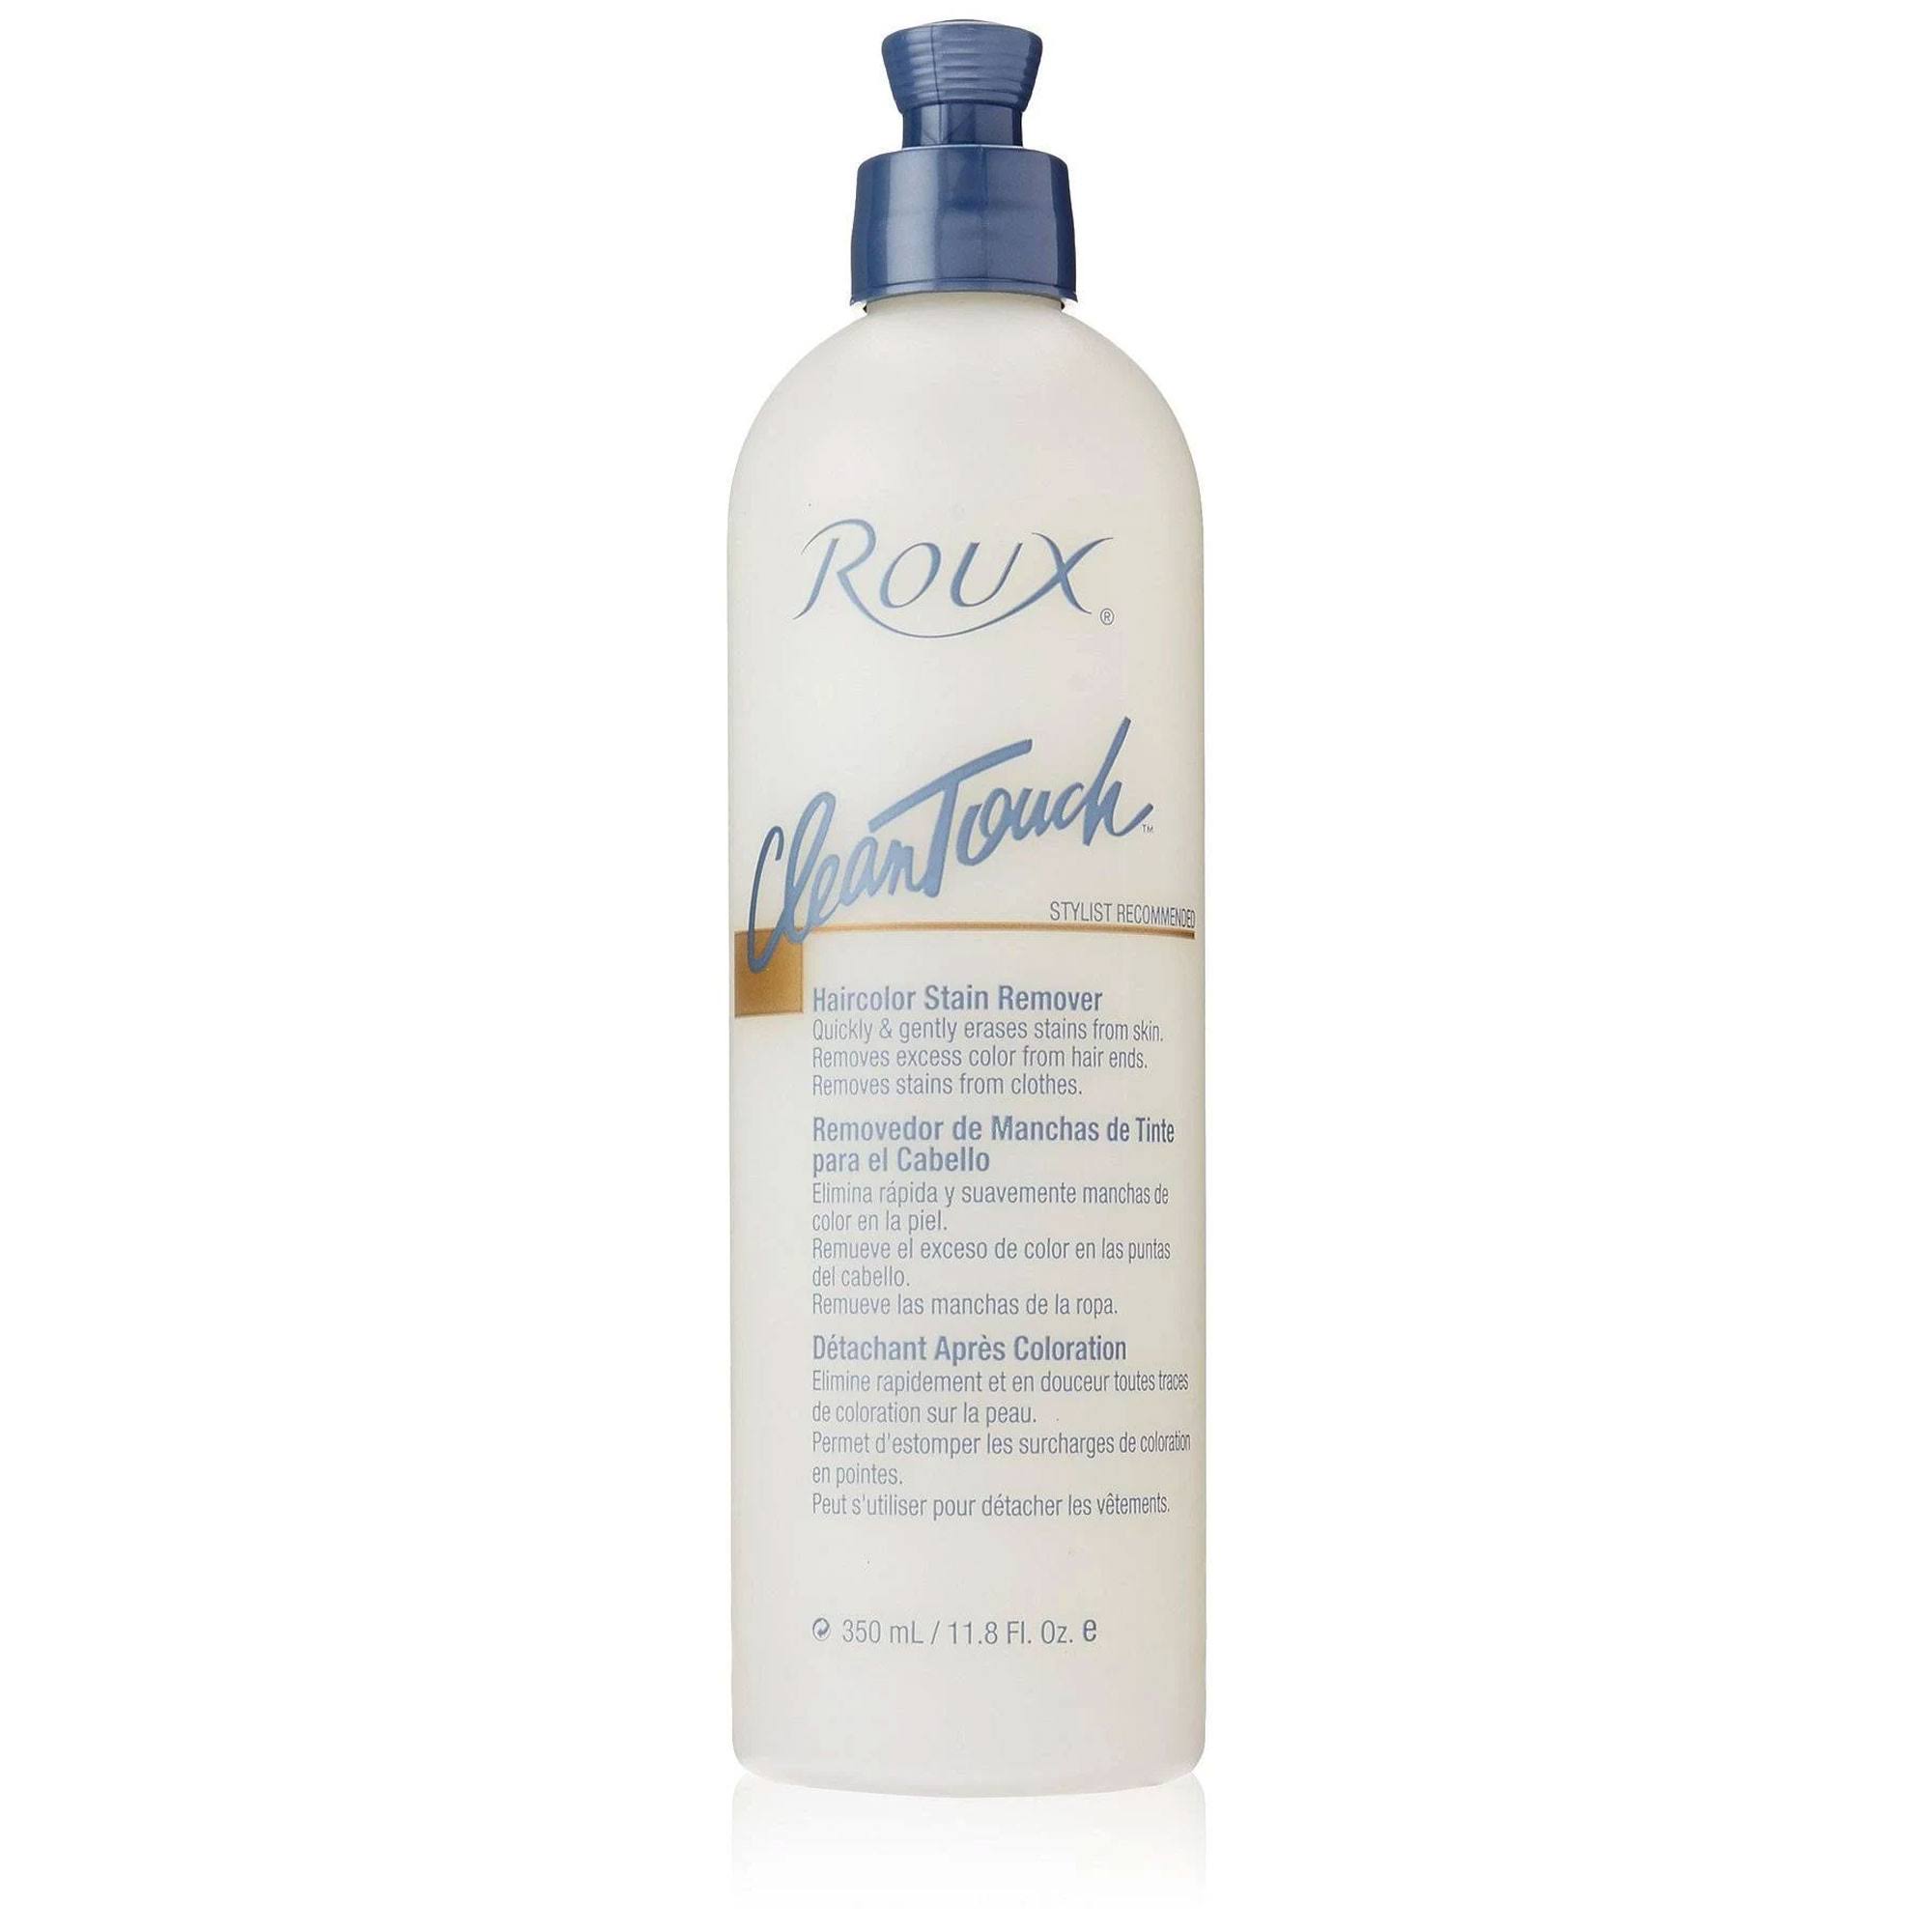 Roux Clean Touch Hair Color Stain Remover - 300ml